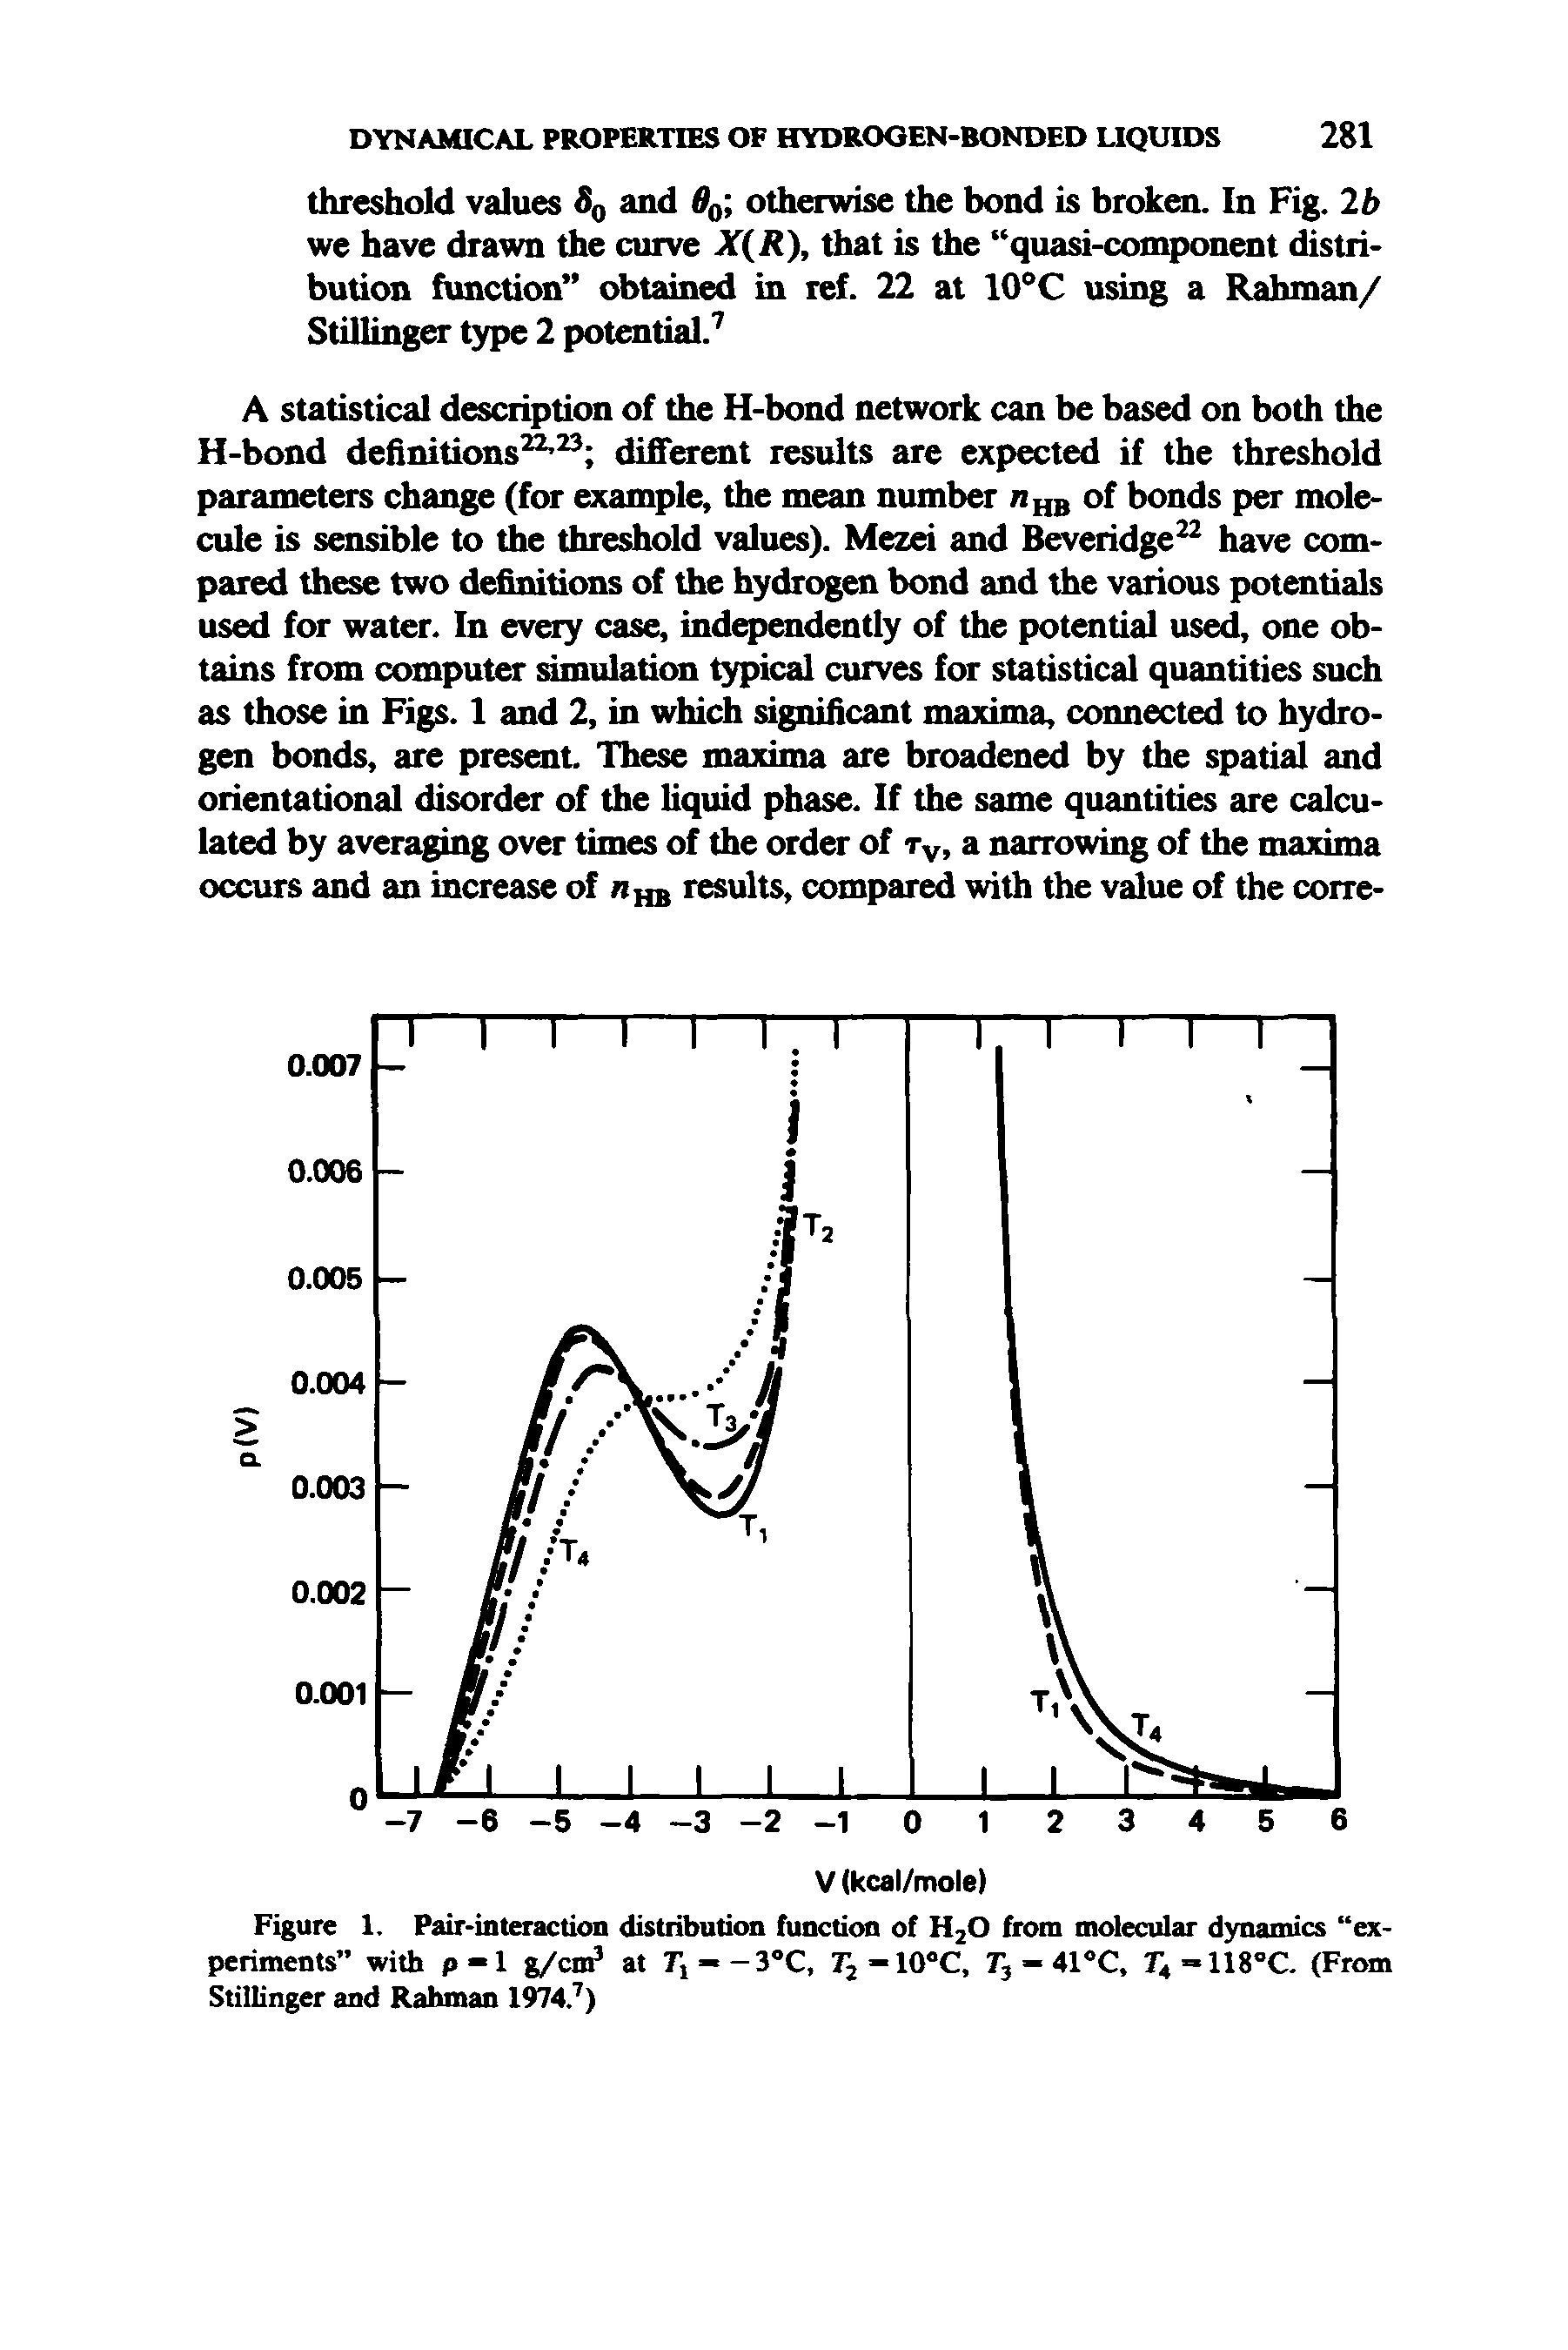 Figure 1. Pair-interaction distribution function of H2O from molecular dynamics experiments with p-1 g/cn at T --3 C, r2-10 C, Tj - 41 C, r4=118 C. (From Stillinger and Rahman 1974. )...